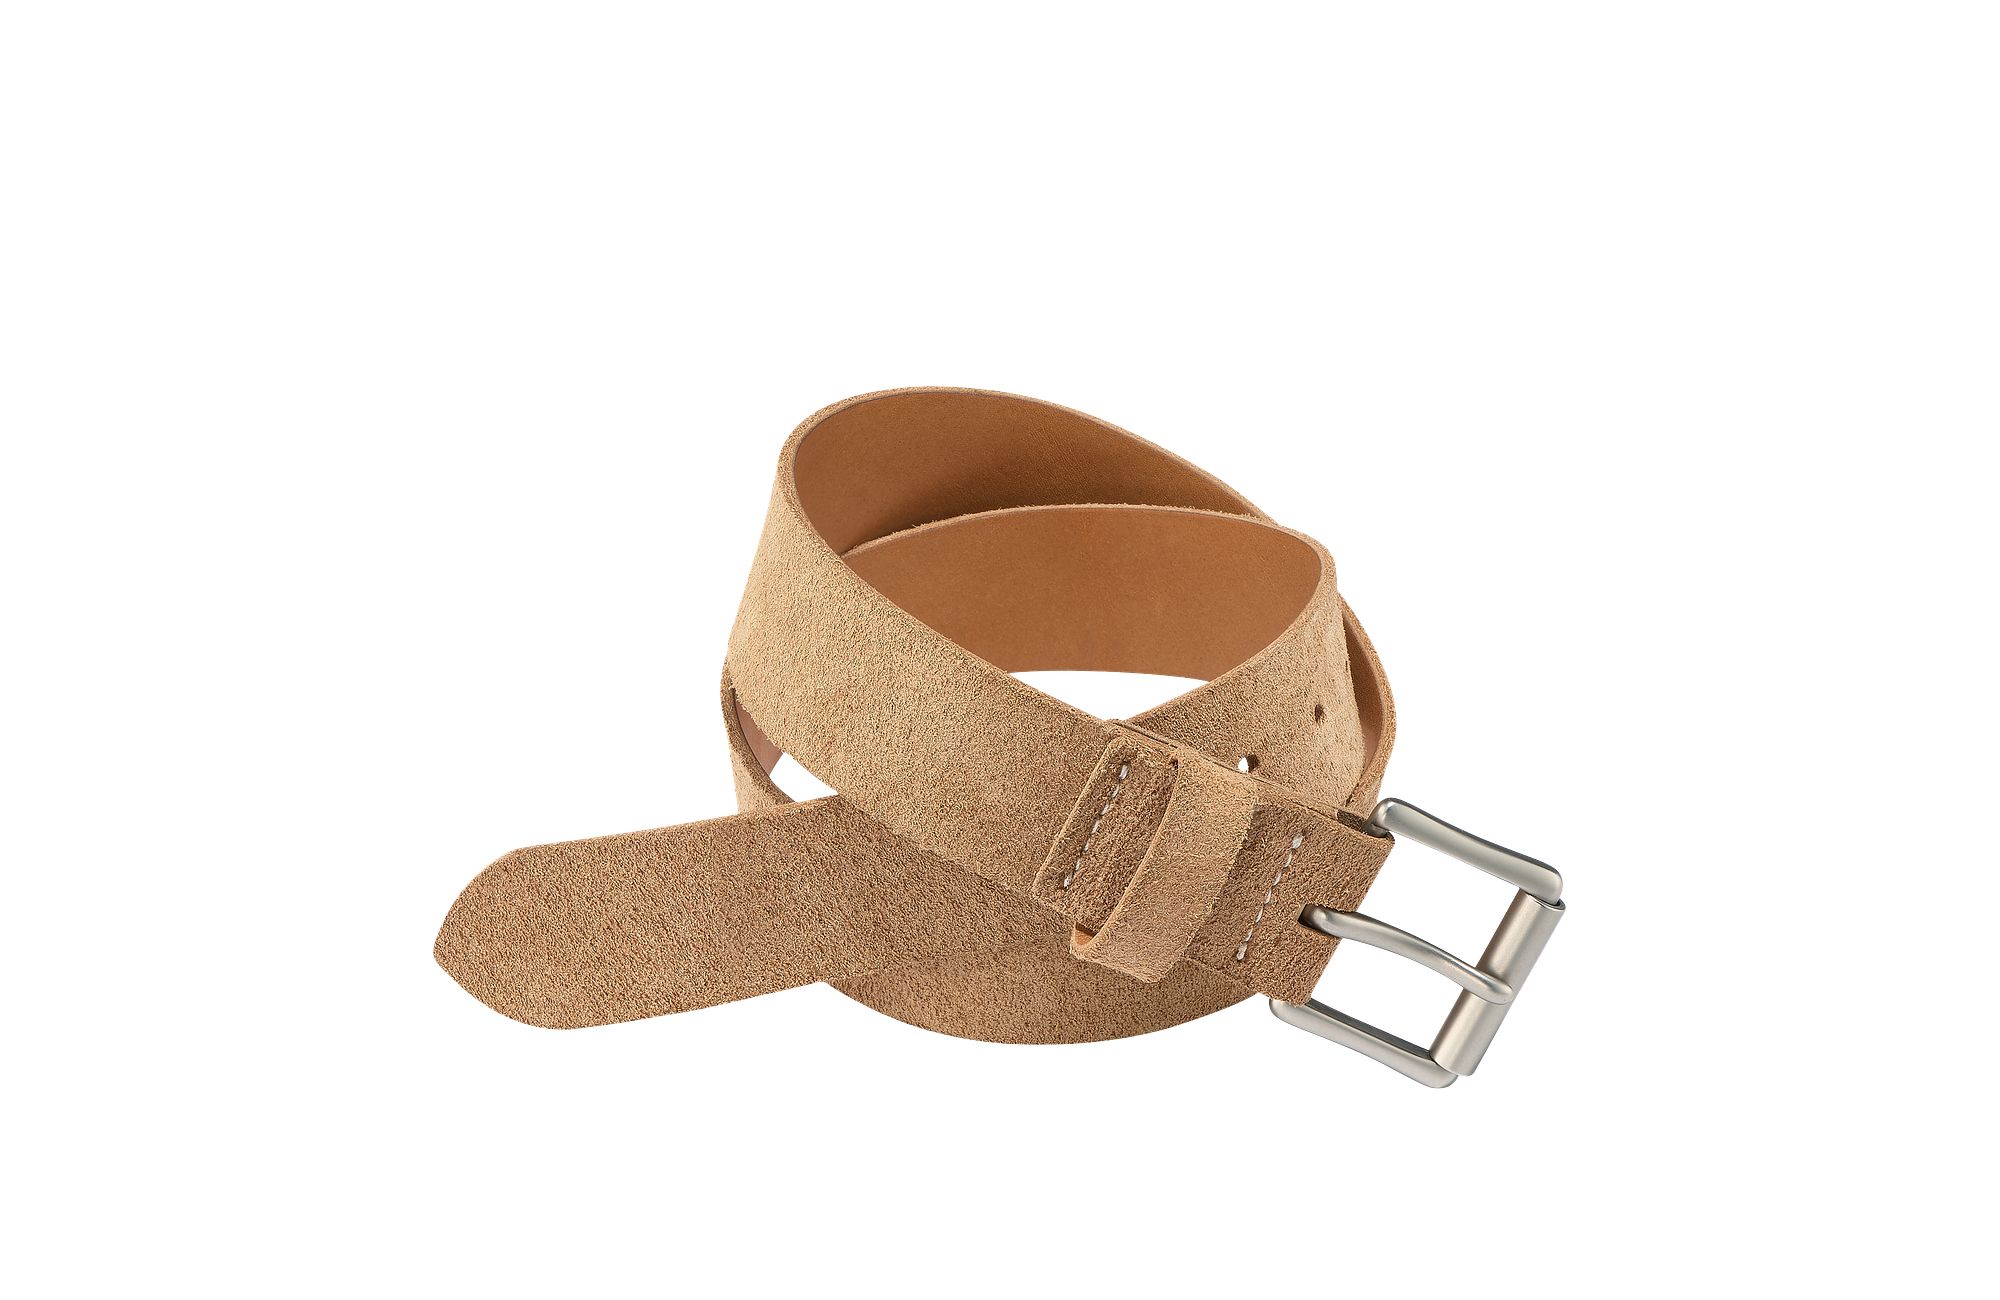 Red Wing Leather Belt | Red Wing